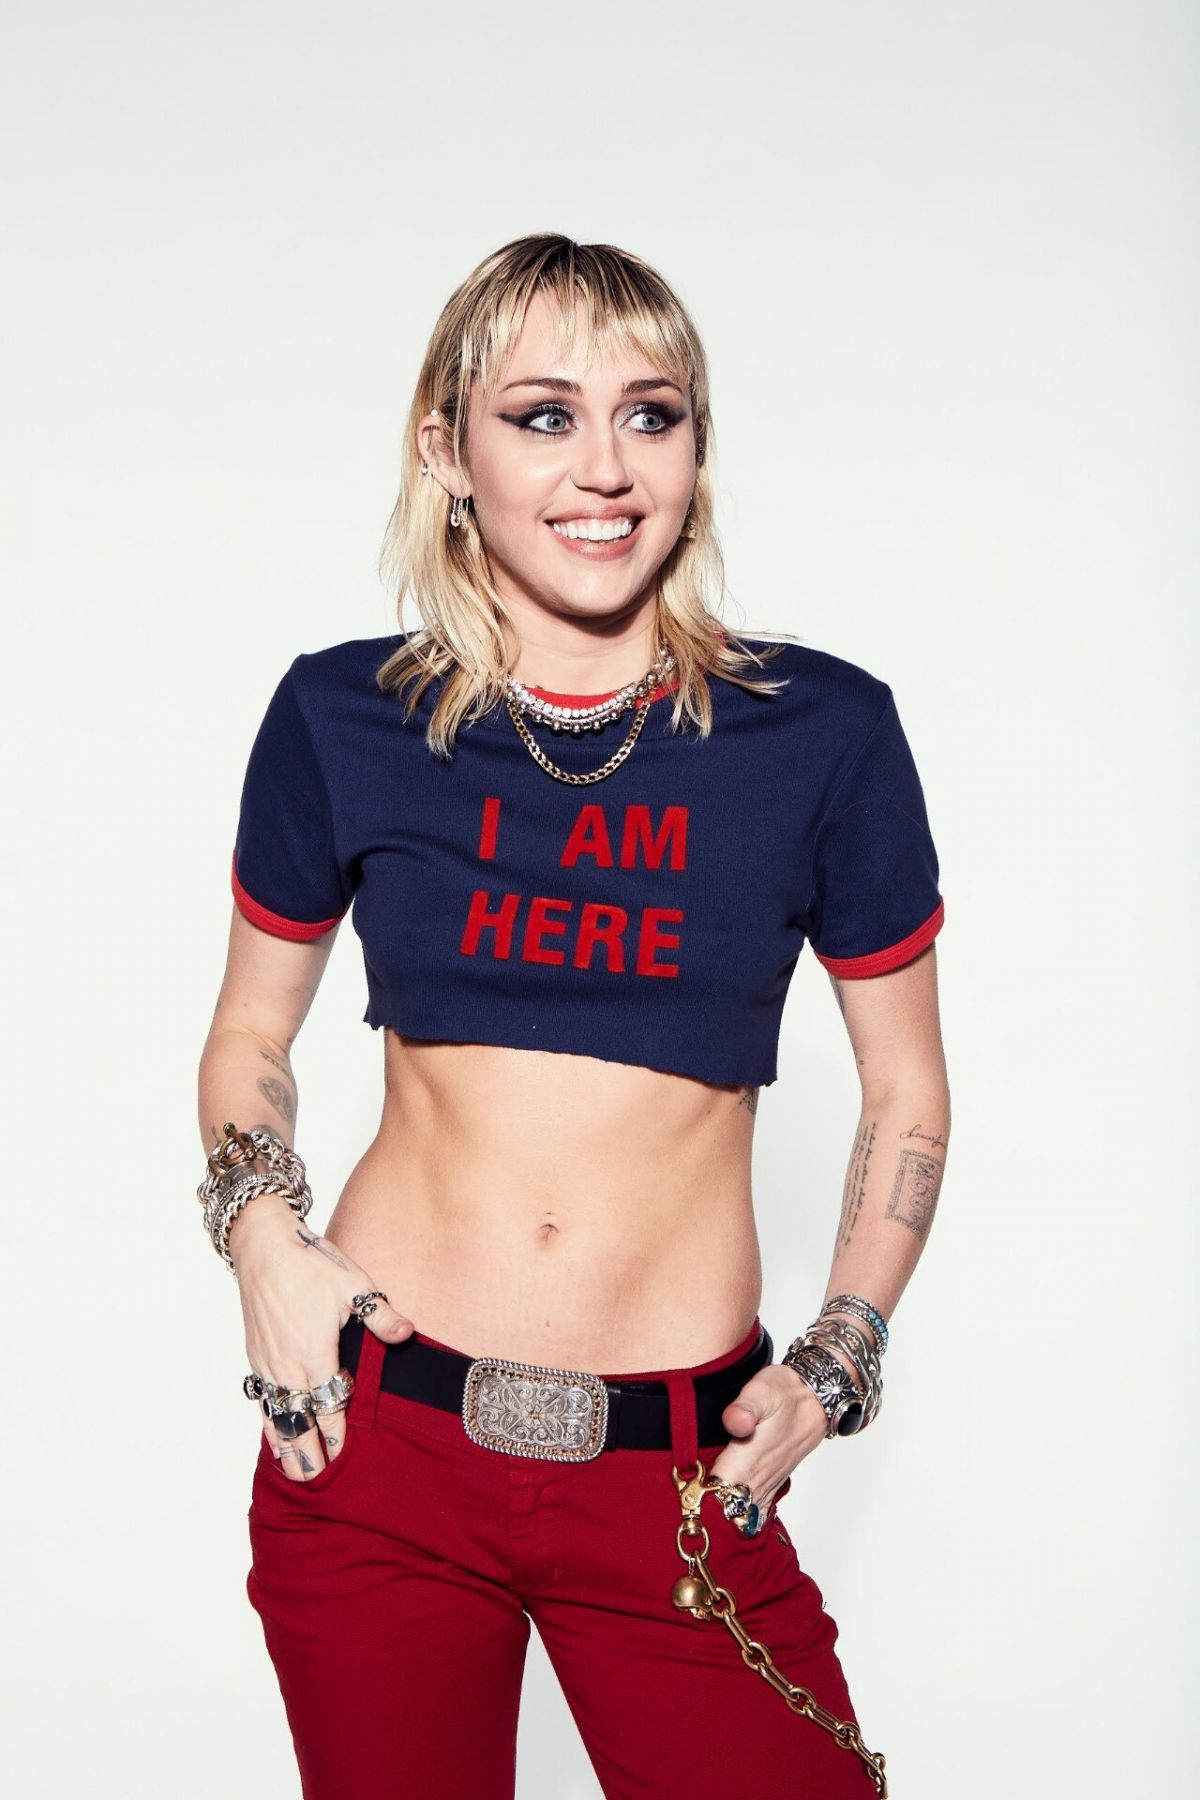 MILEY CYRUS - She Is Here Photoshoot, December 2020 ...